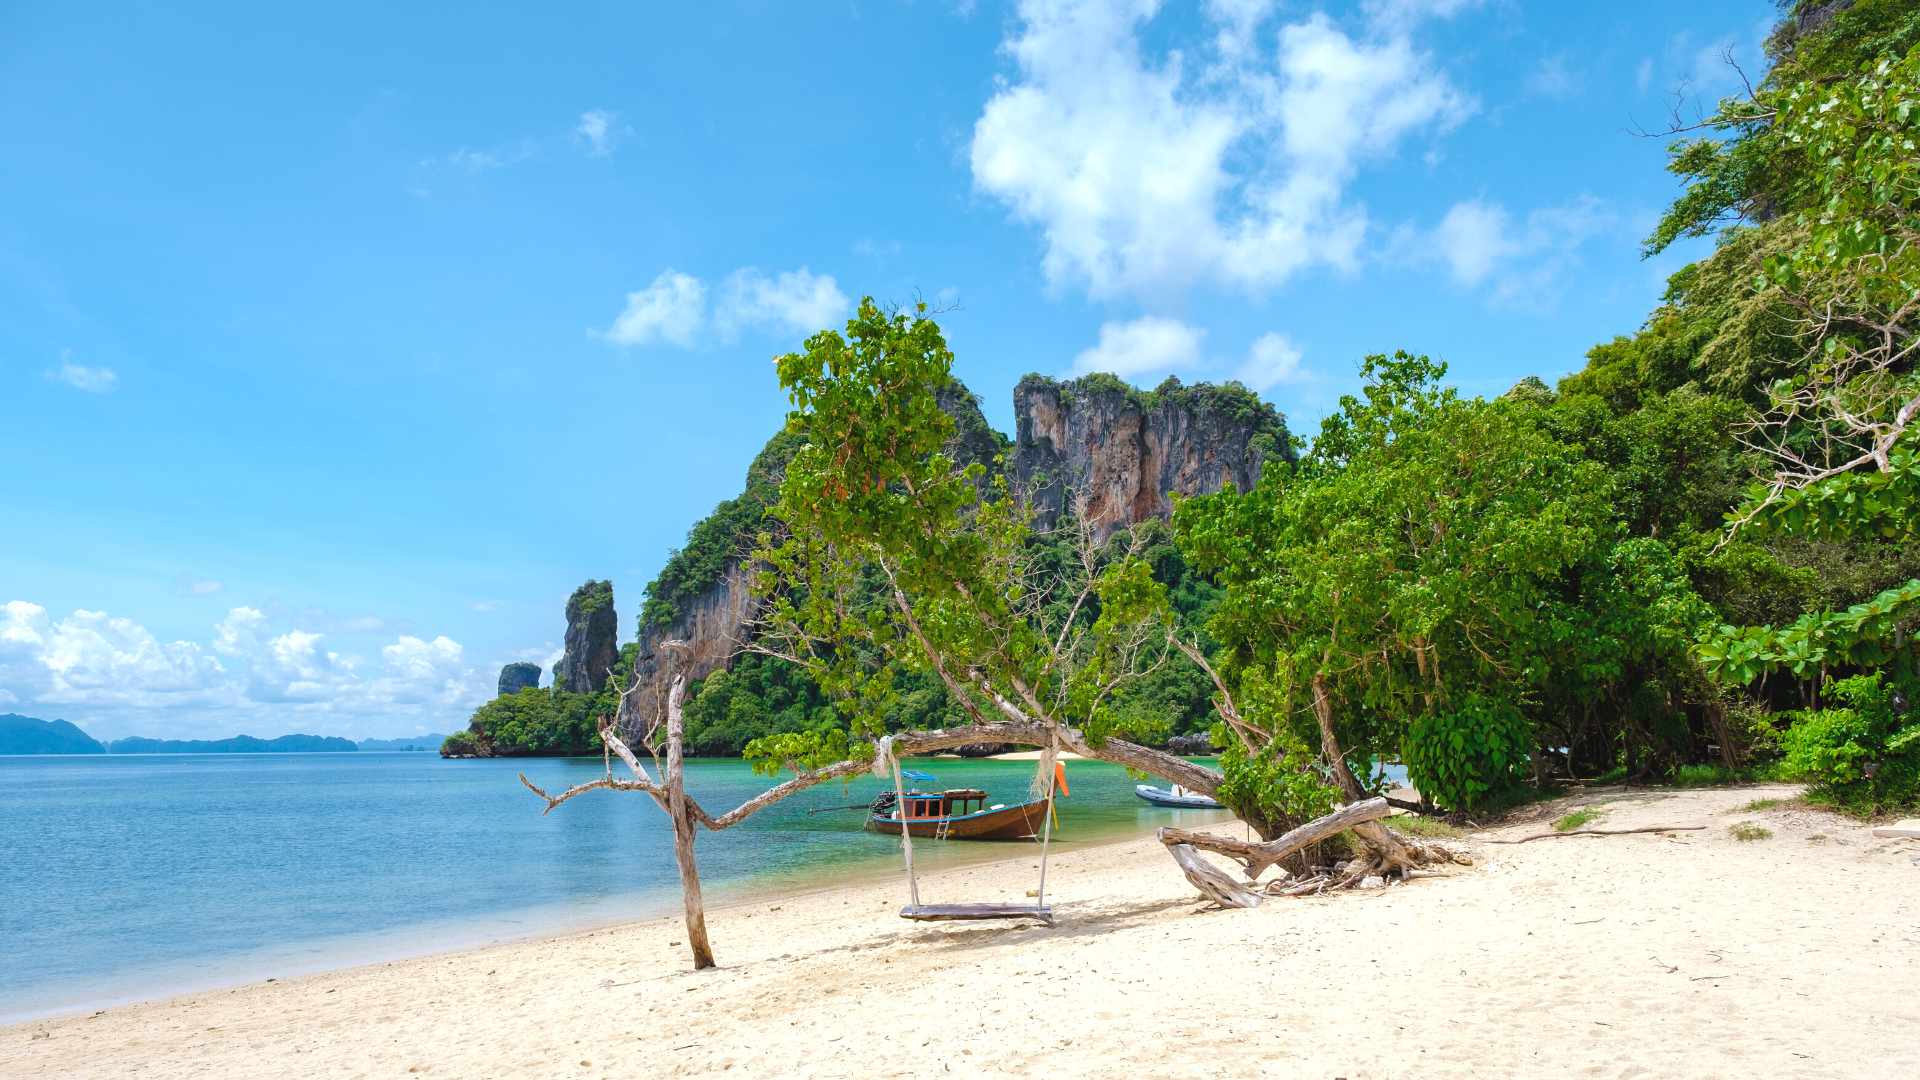 Hong Island Tour, get to Hong island with best Hong island tour packages from Krabi or Phuket - Here at Pakbia island